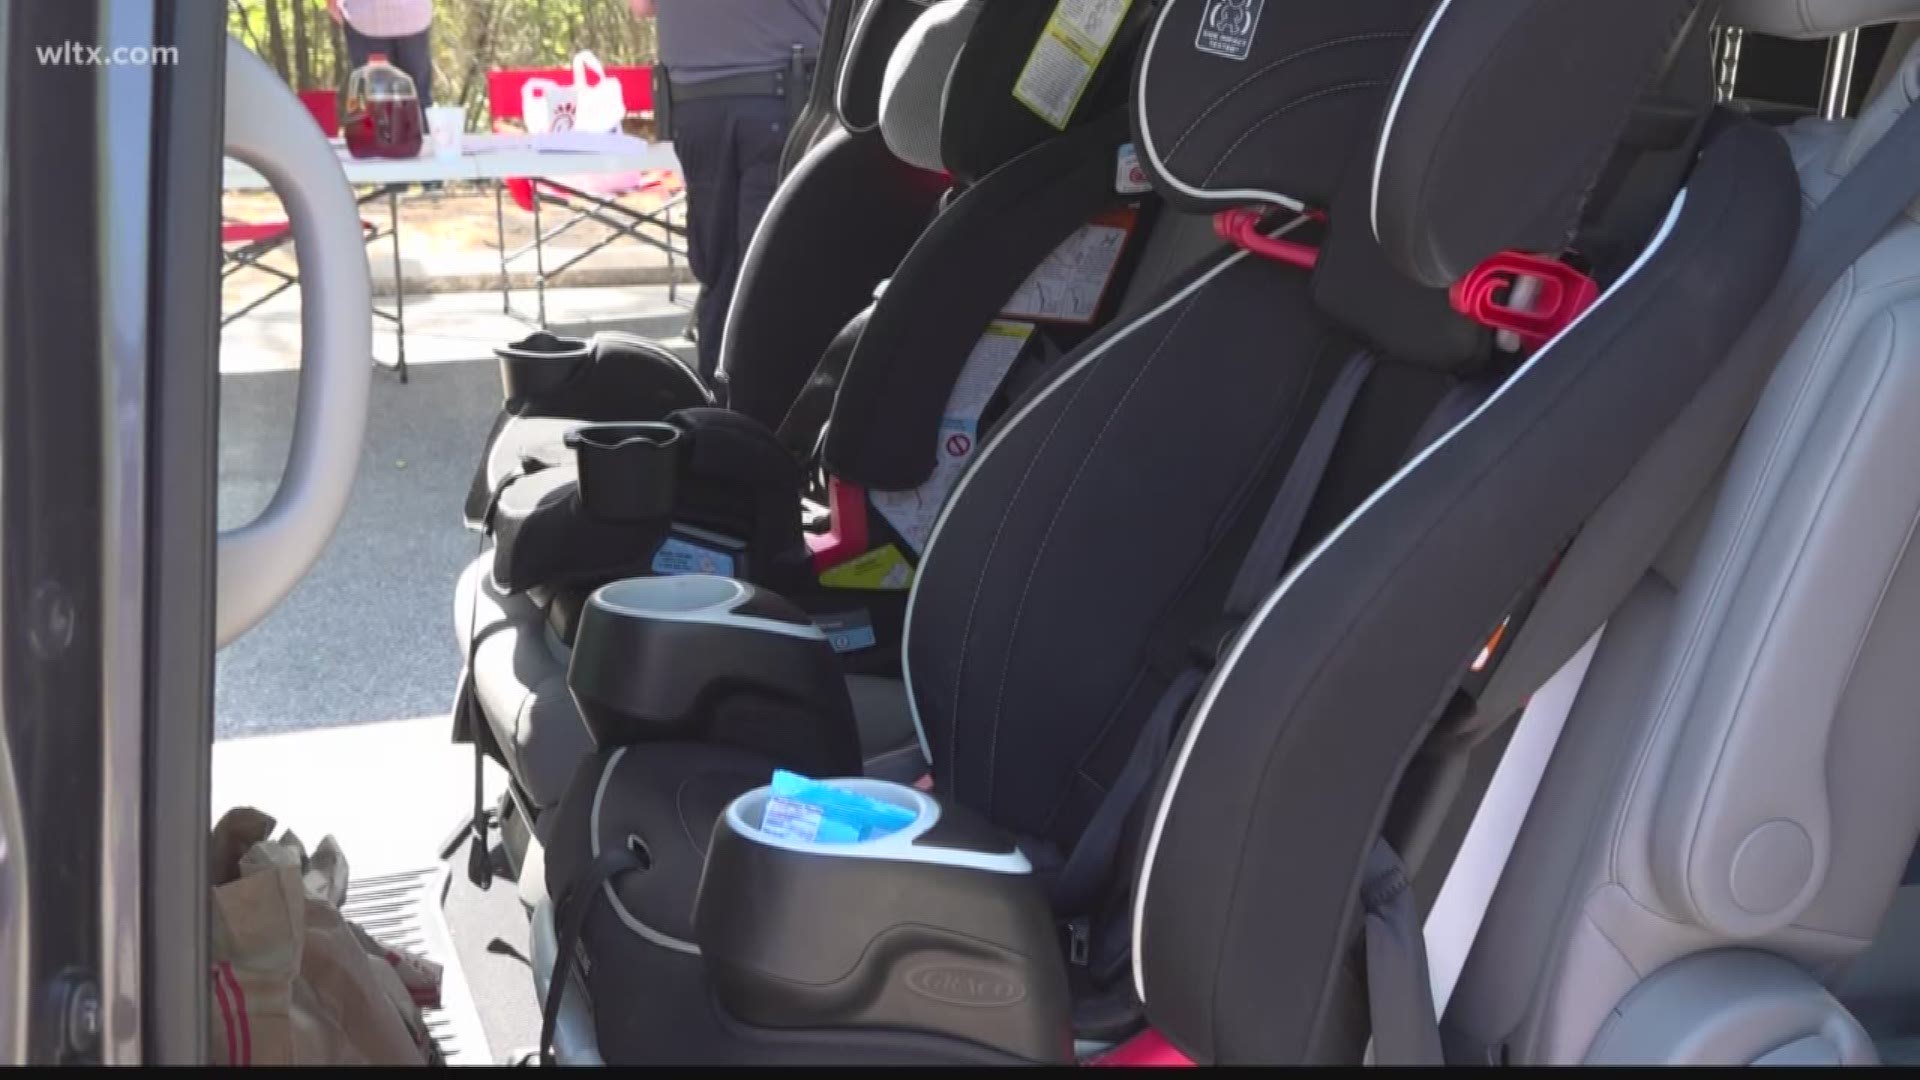 Officer Chris Kaderly says 90 percent of car seats are installed incorrectly. That's why he and his officers spent Thursday making sure parents knew the right way.